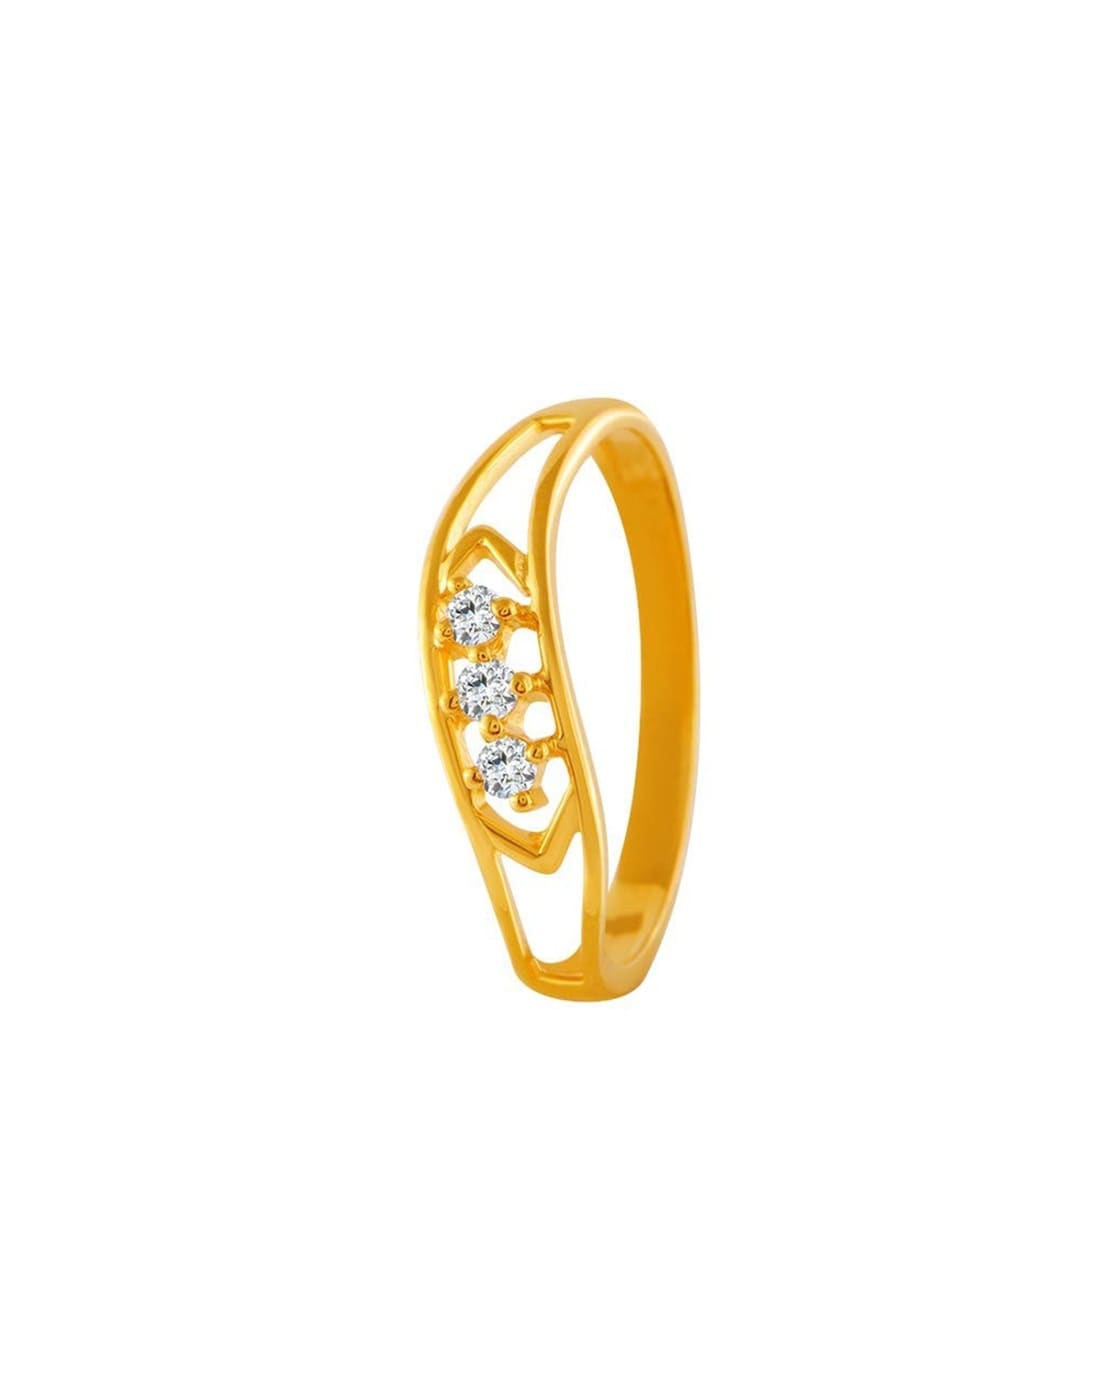 PC Chandra Jewellers MEN COLLECTION 22kt Yellow Gold ring Price in India -  Buy PC Chandra Jewellers MEN COLLECTION 22kt Yellow Gold ring online at  Flipkart.com